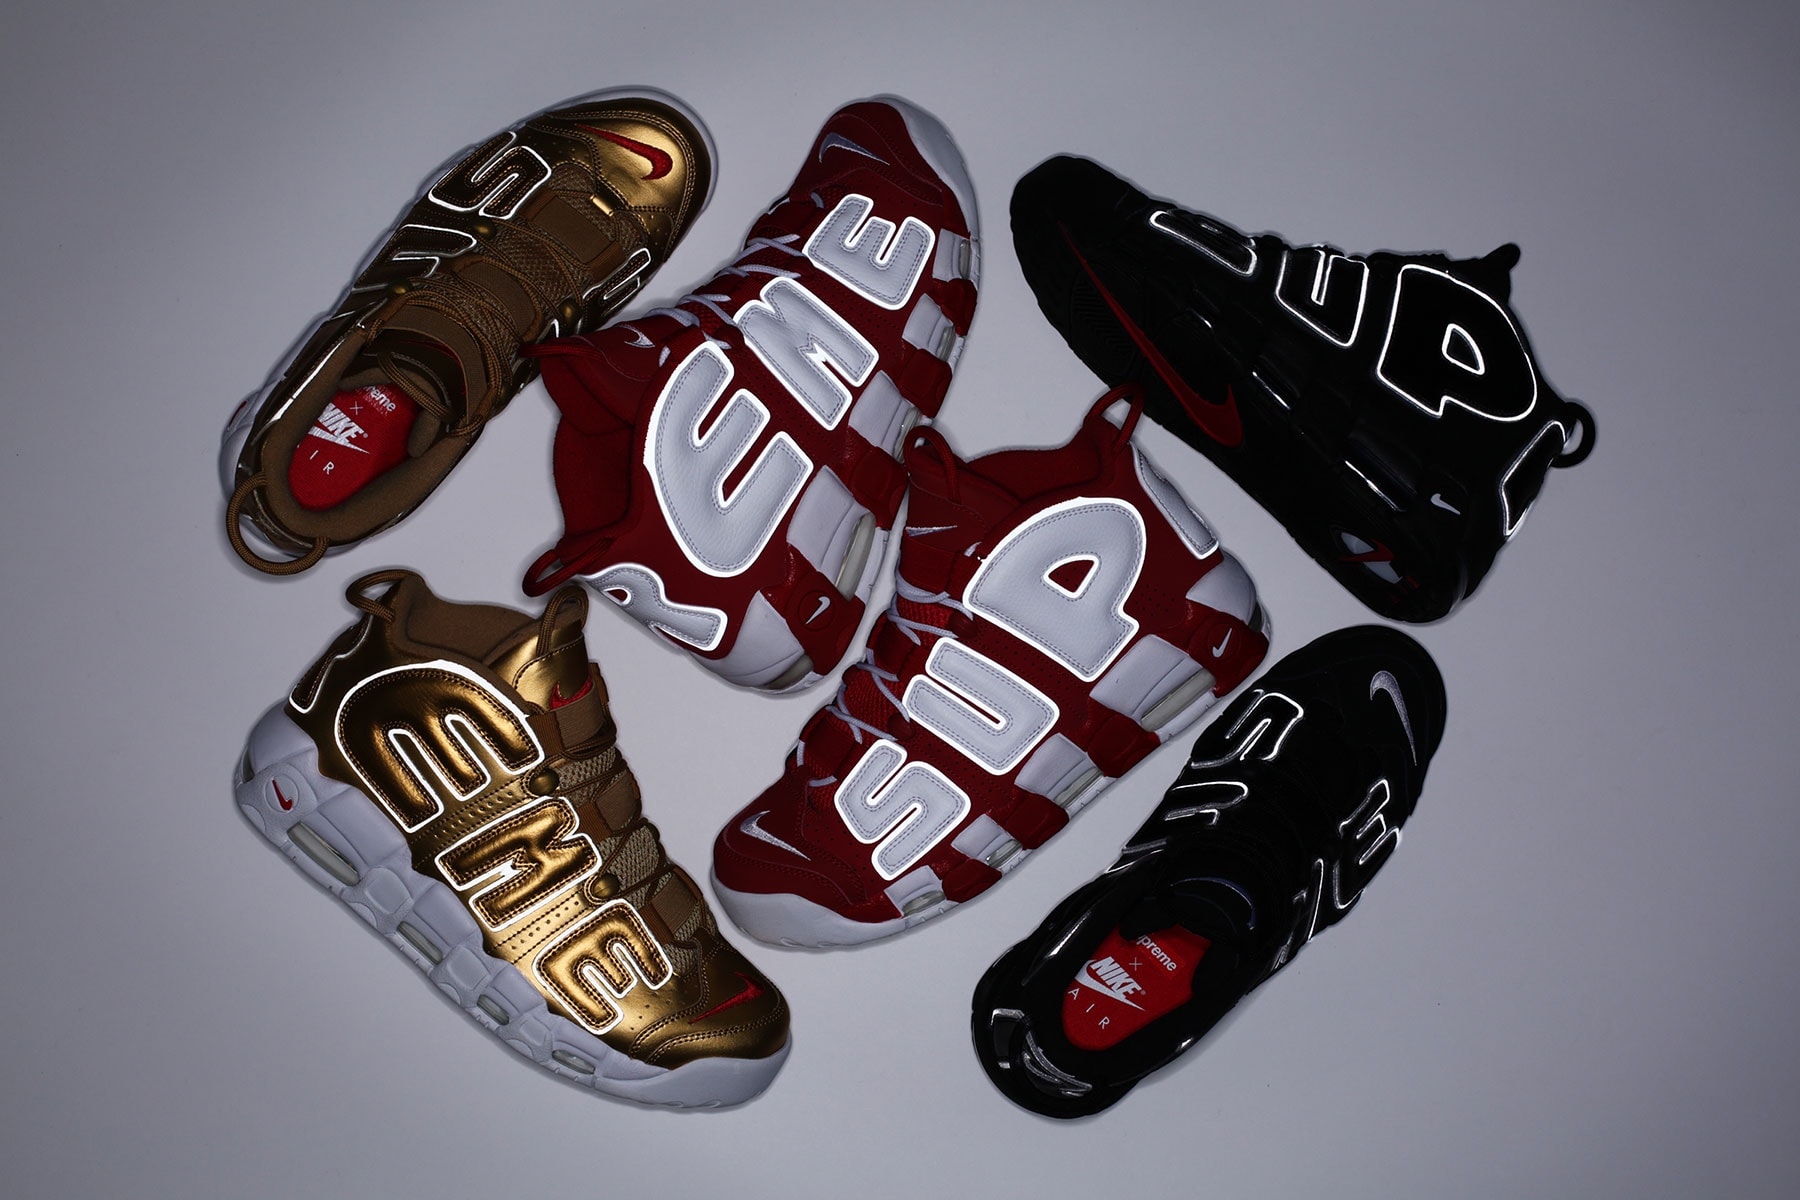 Supreme x Nike Air More Uptempo Official Images & Details